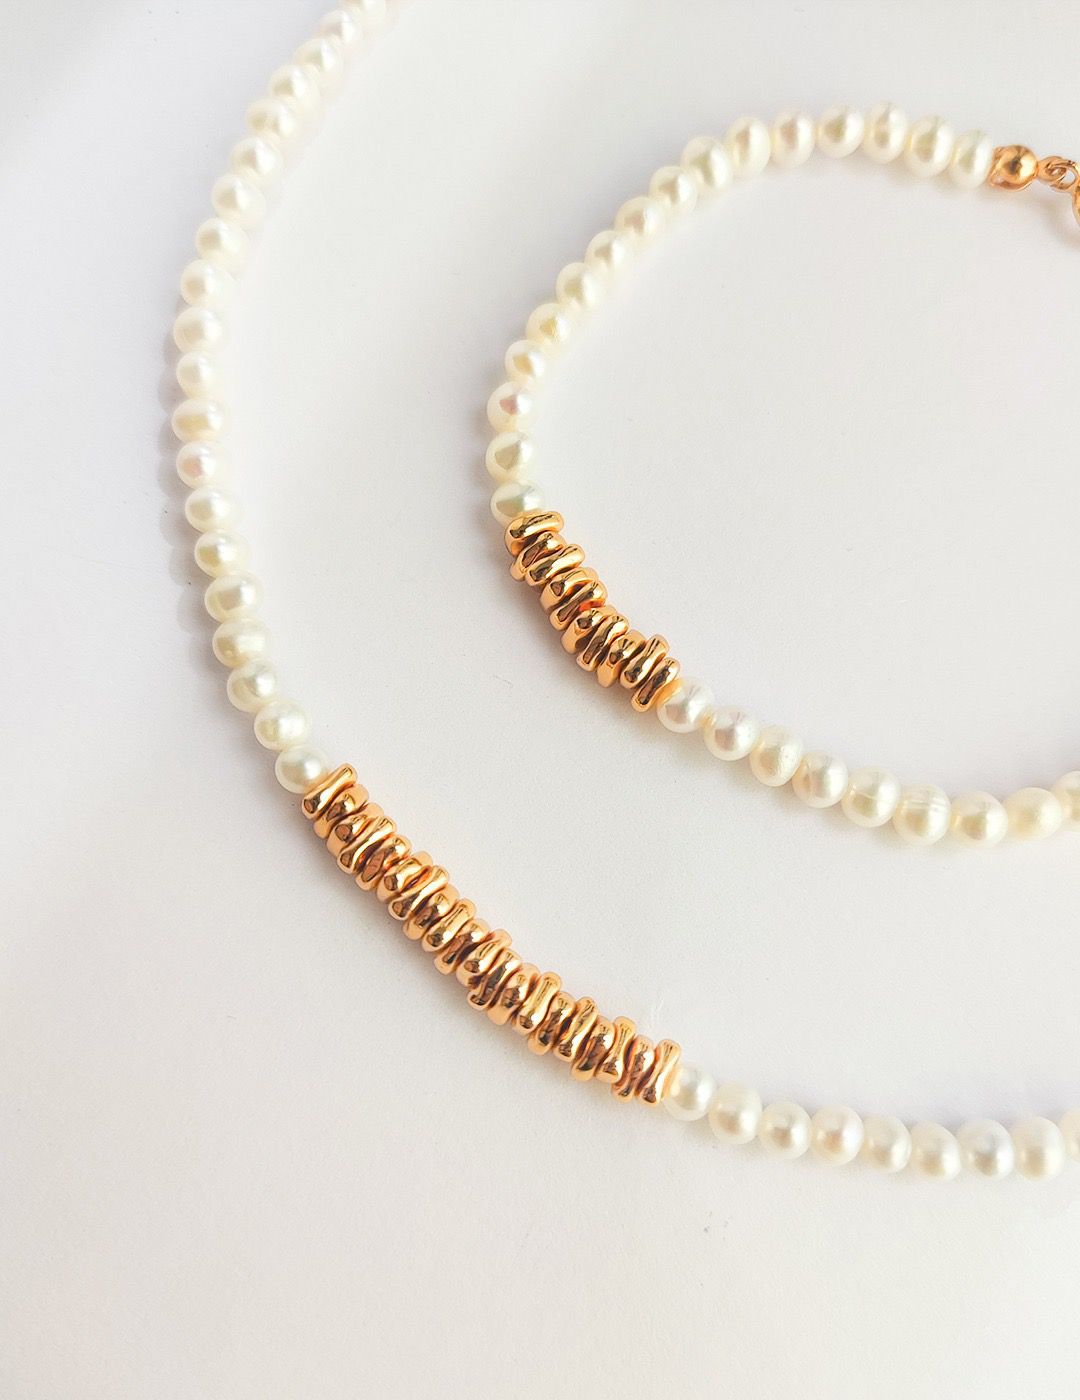 Freshwater Pearl Necklace with Gold Chain - Classic Elegance and Modern Style